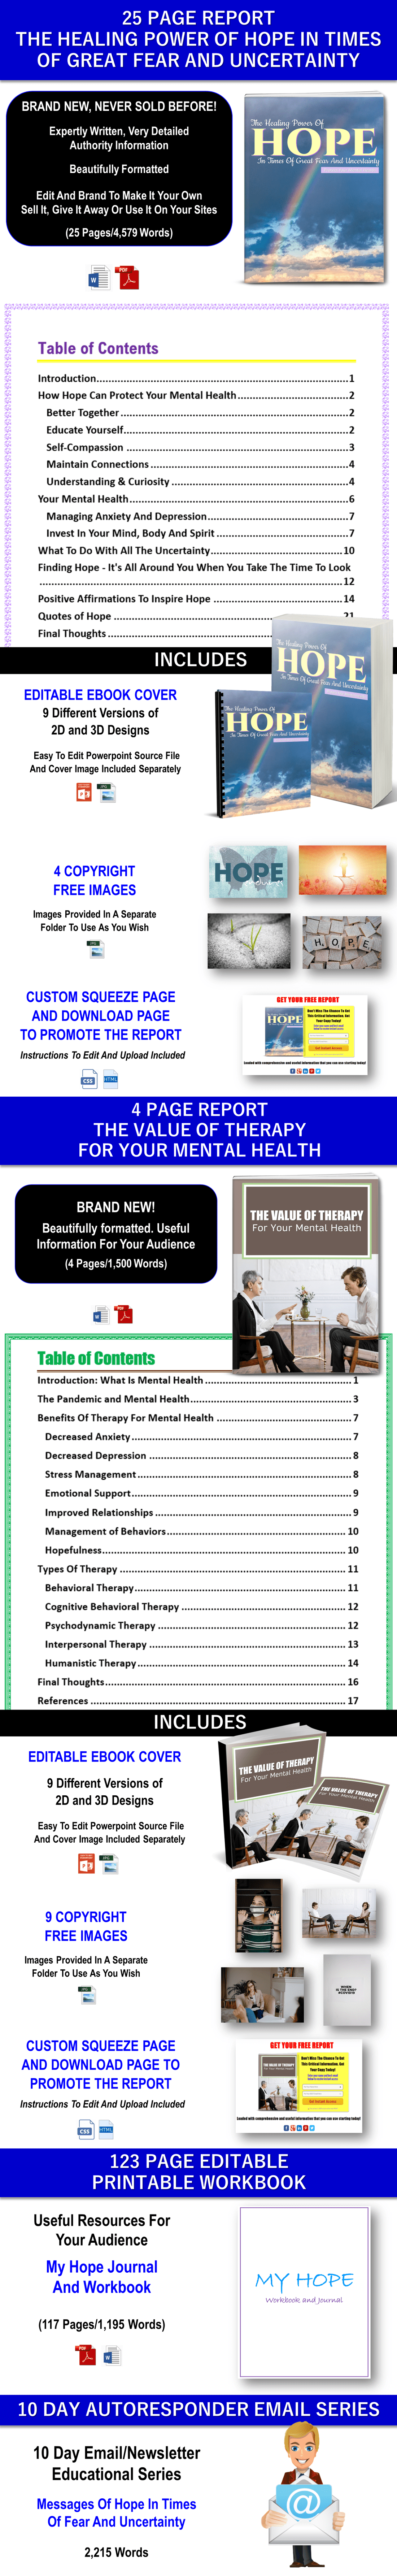 Hope And Value Of Therapy For Mental Health Content - Private Label Rights